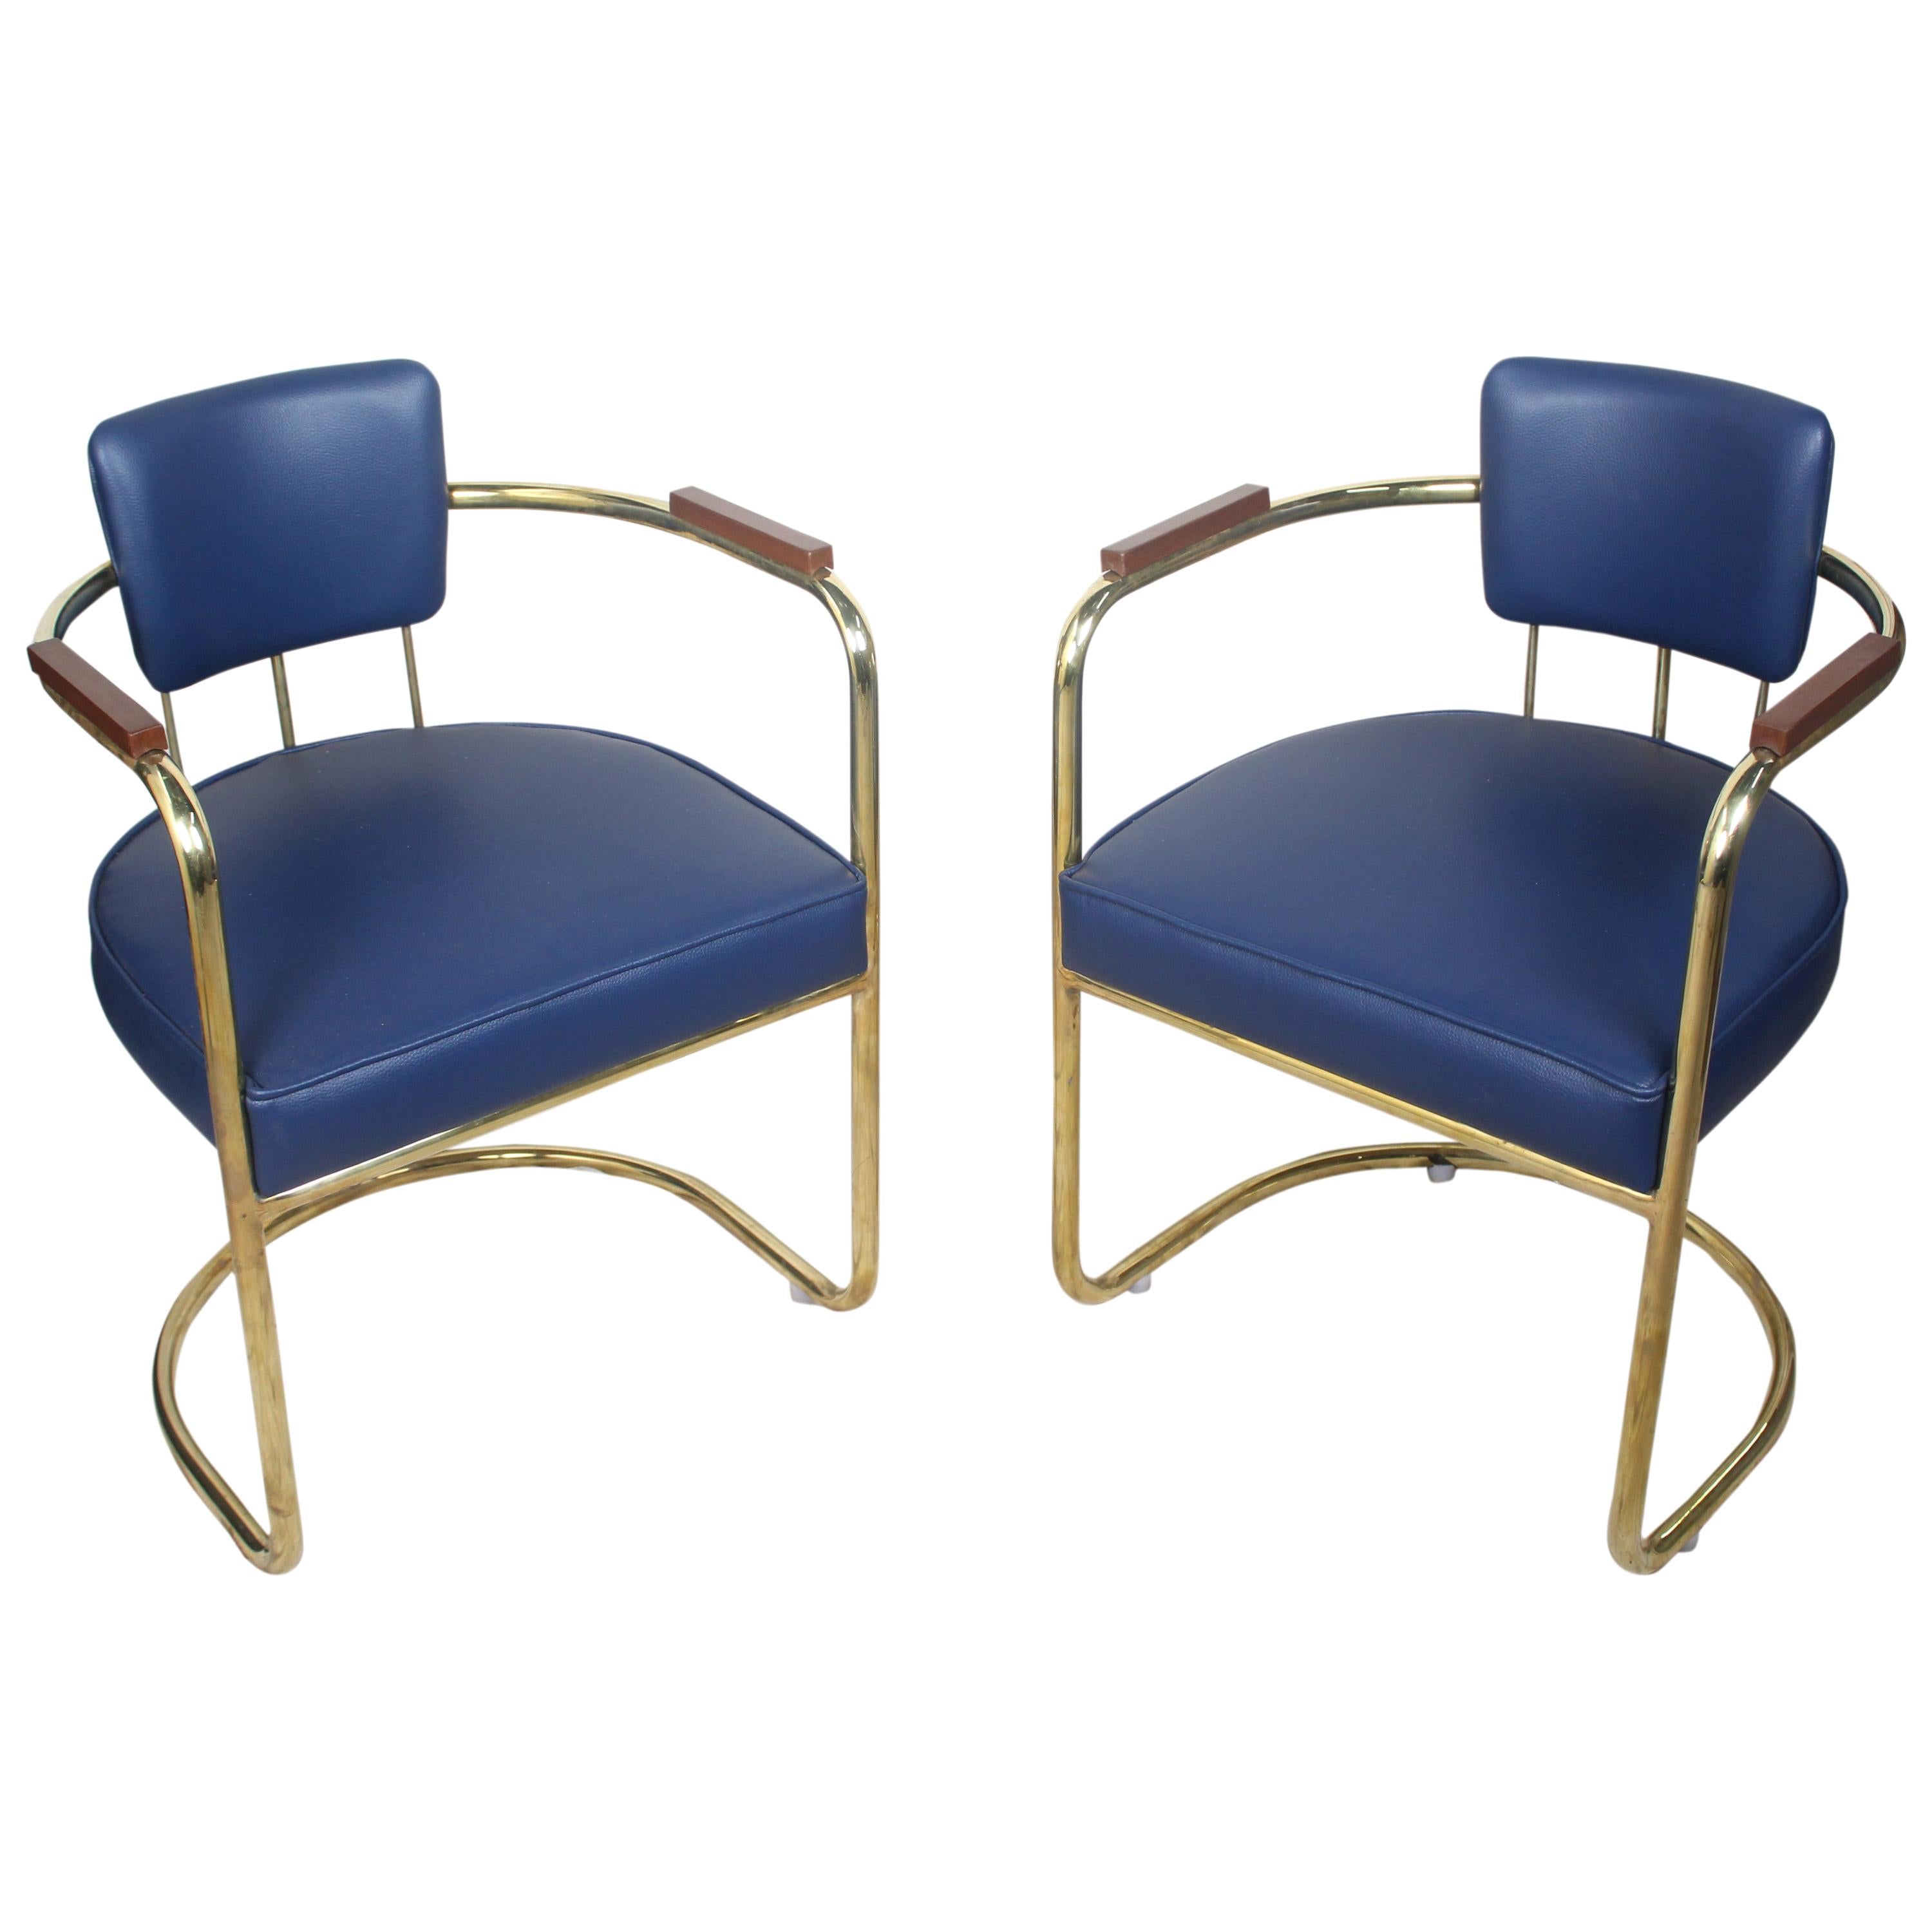 Pair of Brass Captains Chairs with Navy Blue Cushions